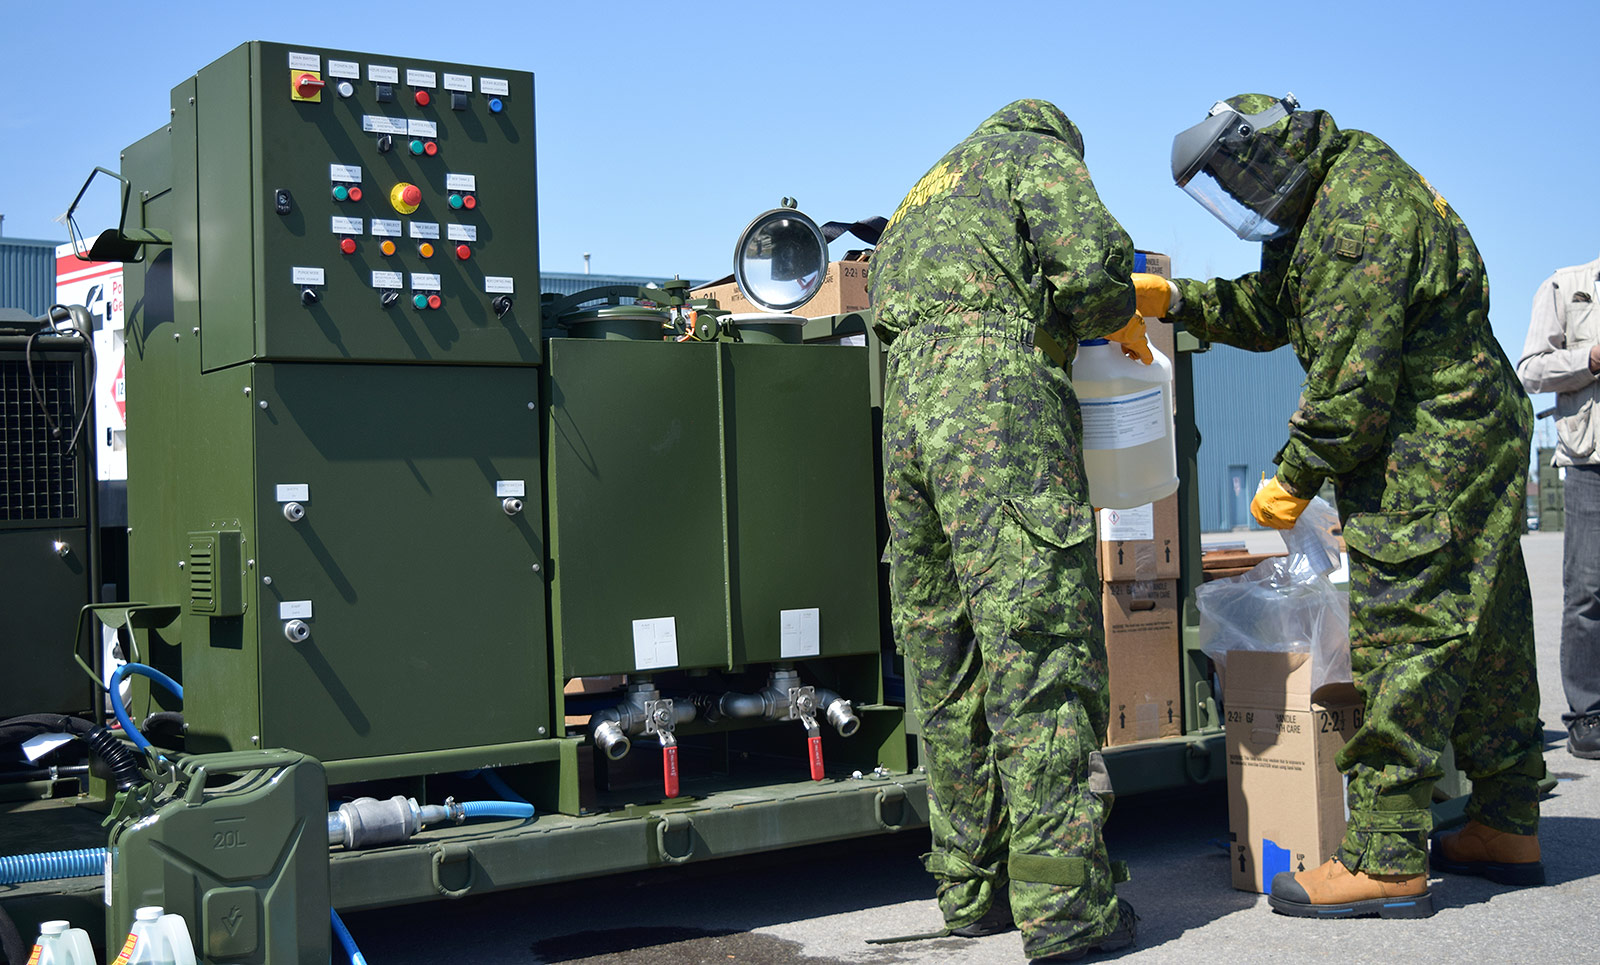 CBRN Personnel and Vehicle Decontamination Systems